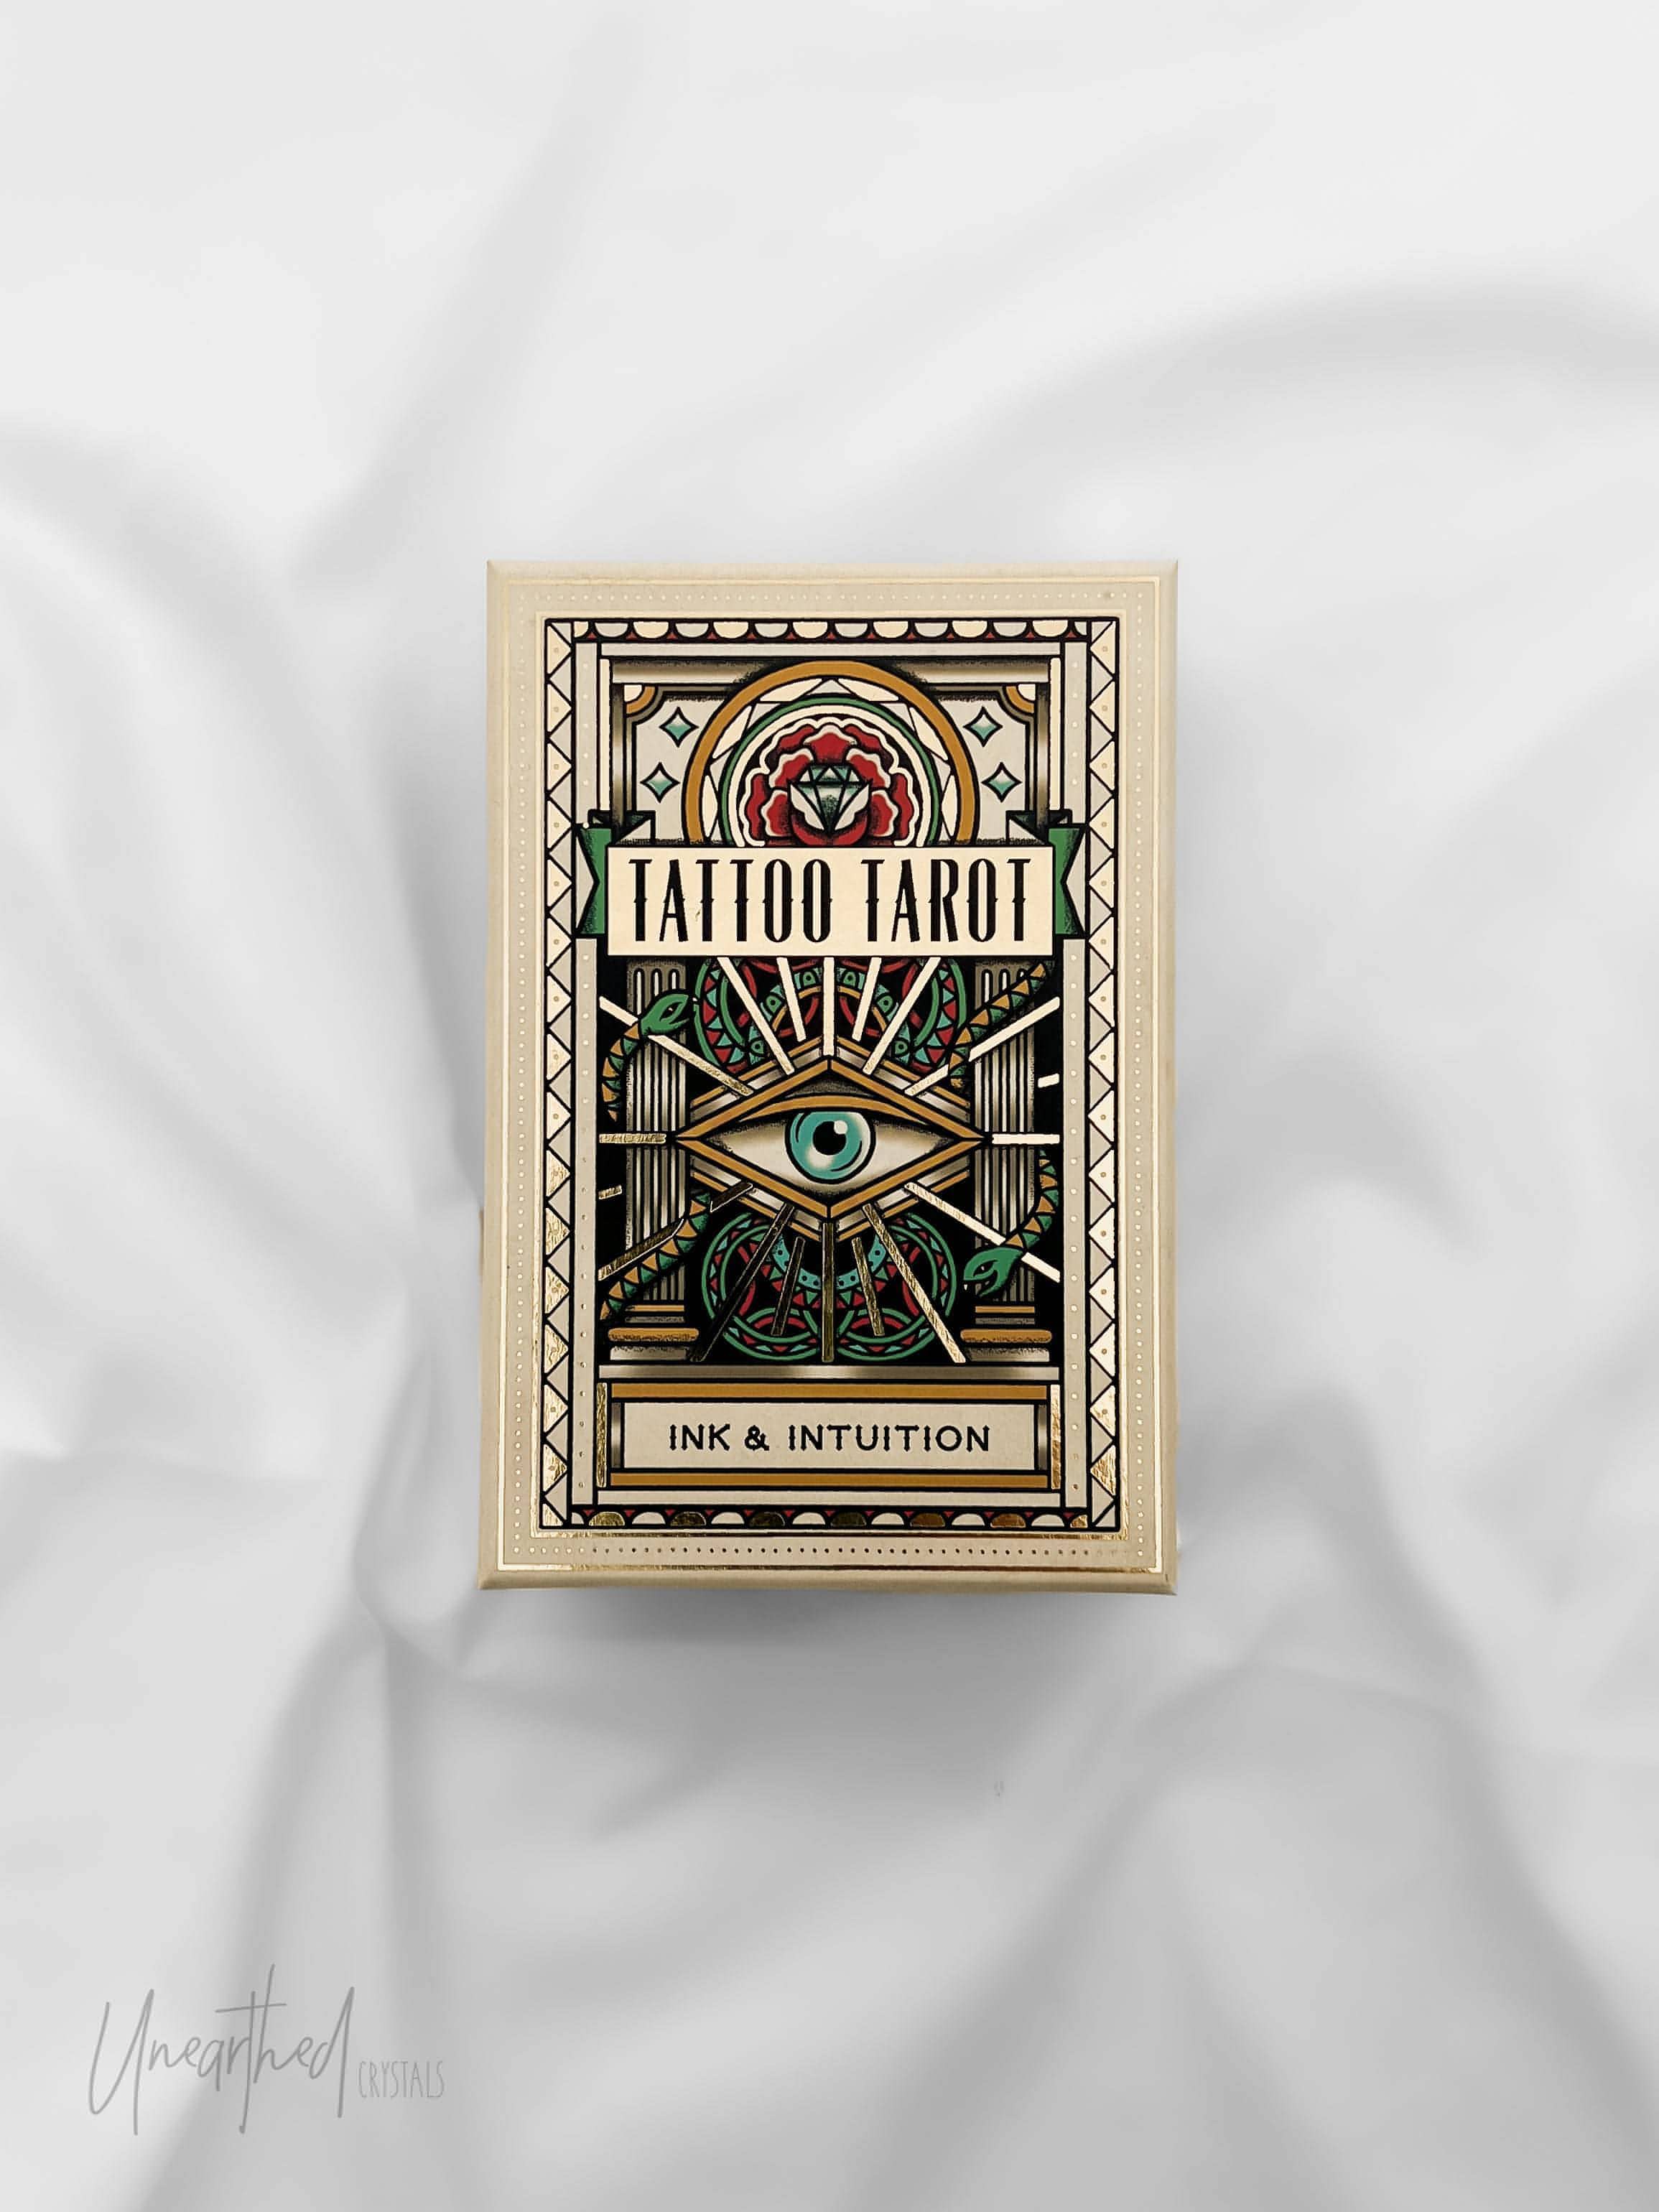 Buy Tattoo Tarot Ink and Intuition Online in India  Etsy